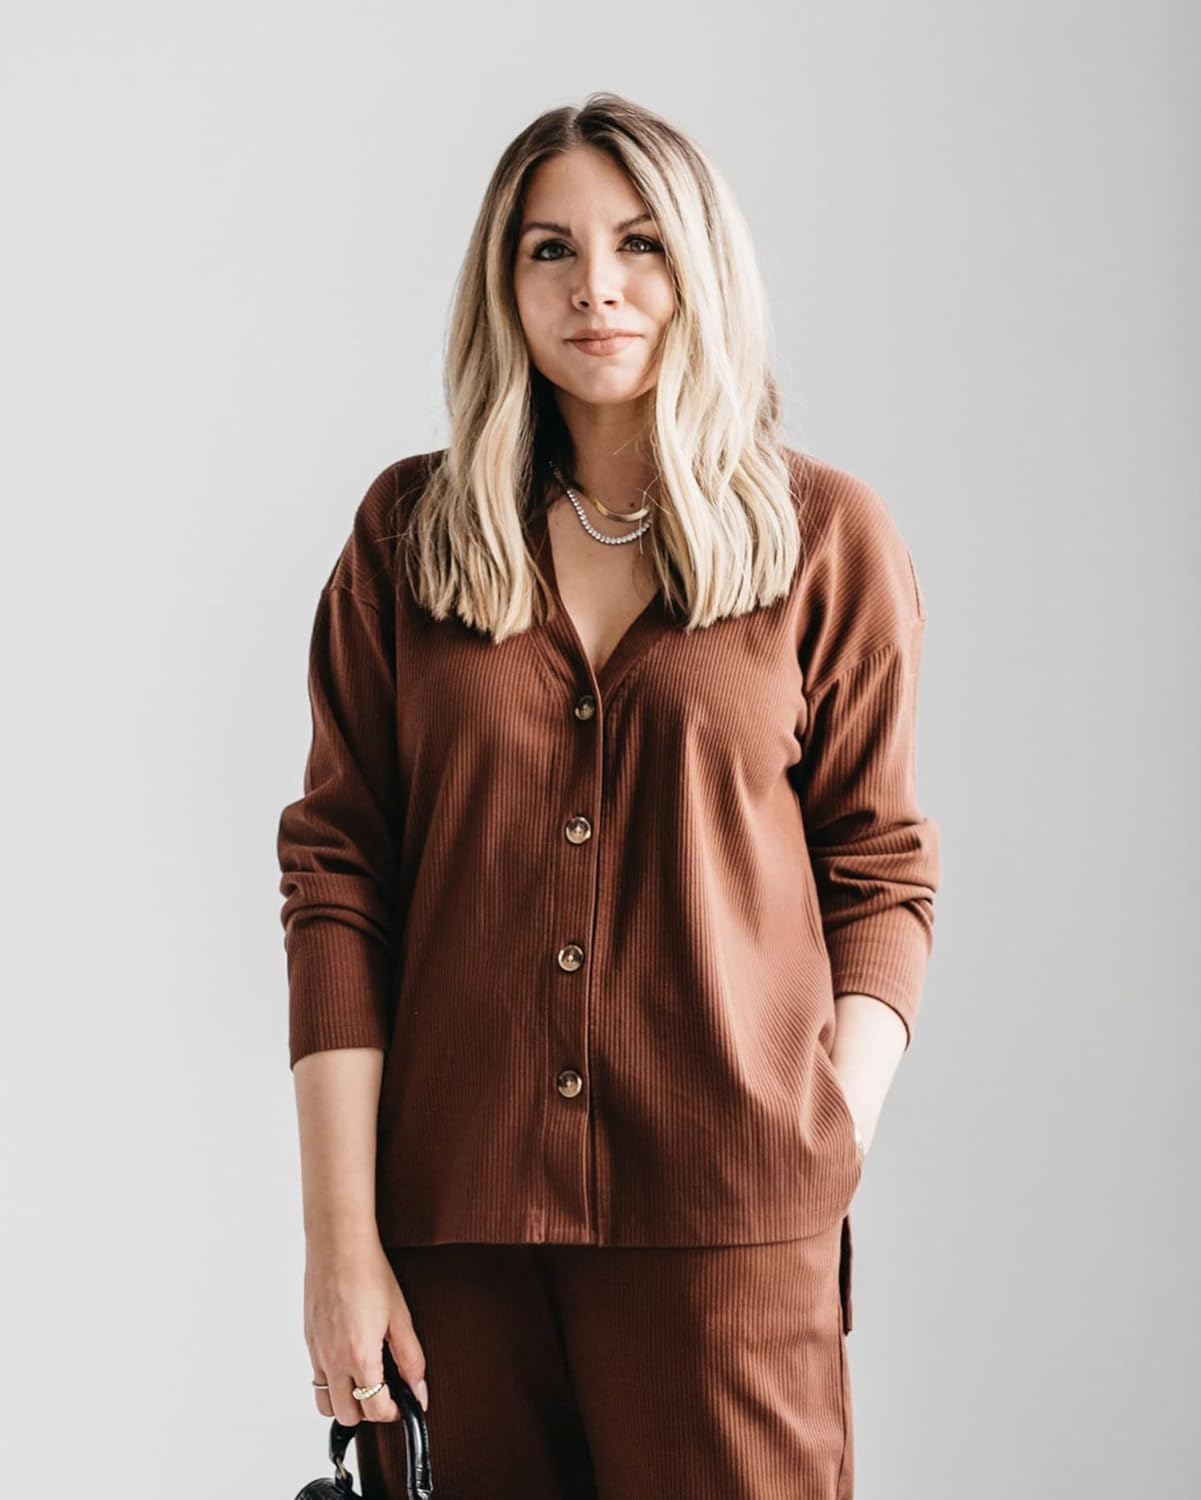 The Drop Women' Chocolate Button Front Ribbed Cardigan by @ashleyrobertson